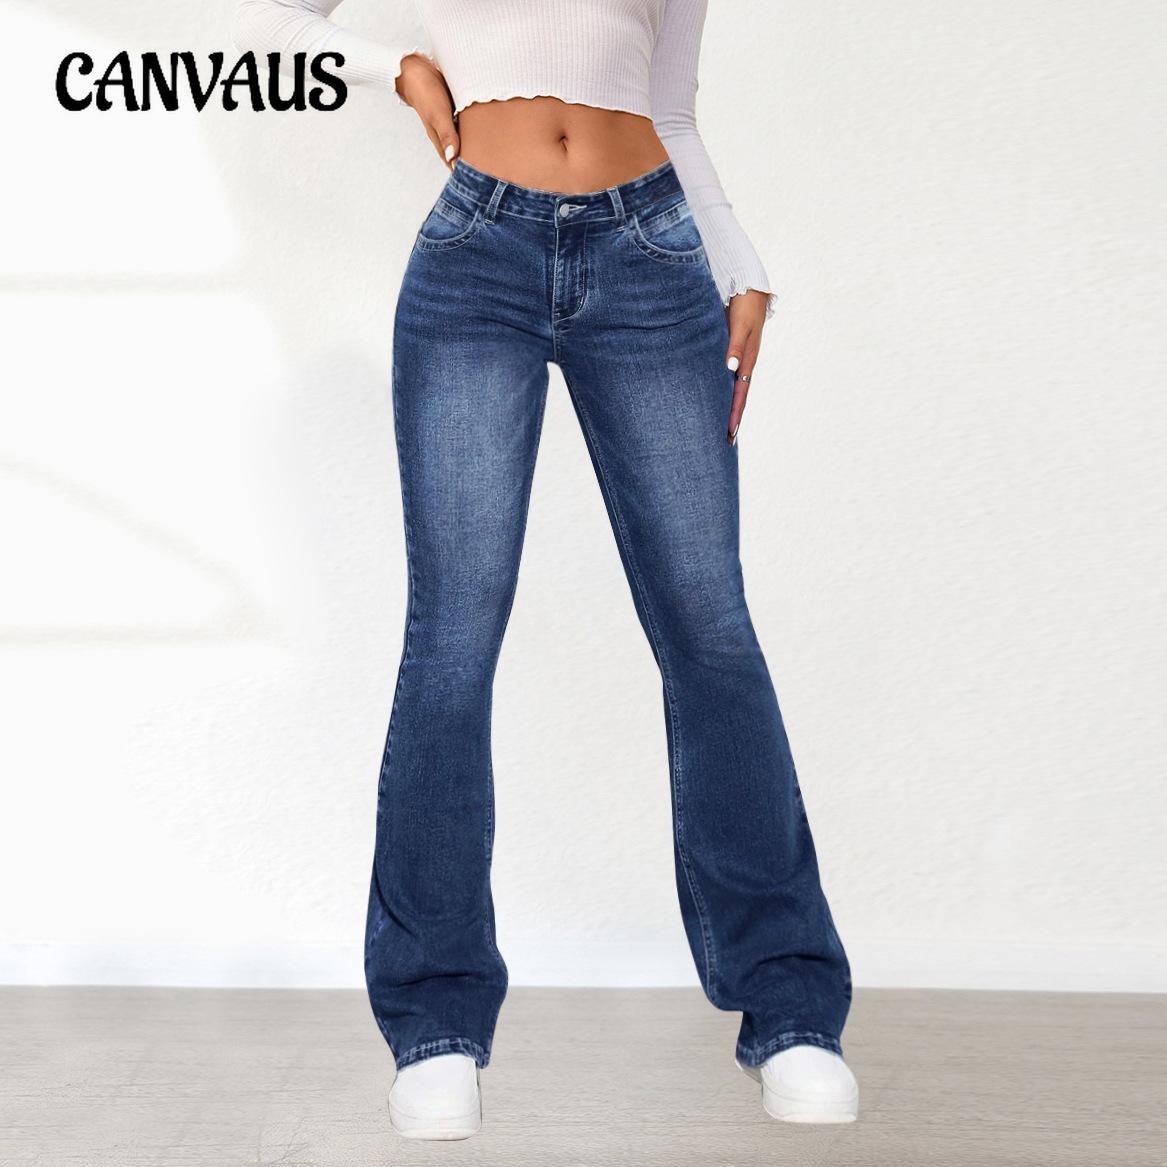 CANVAUS Spring, Autumn and Summer Women's Jeans Temperament Commuter Pant Slim Thin Micro Trousers